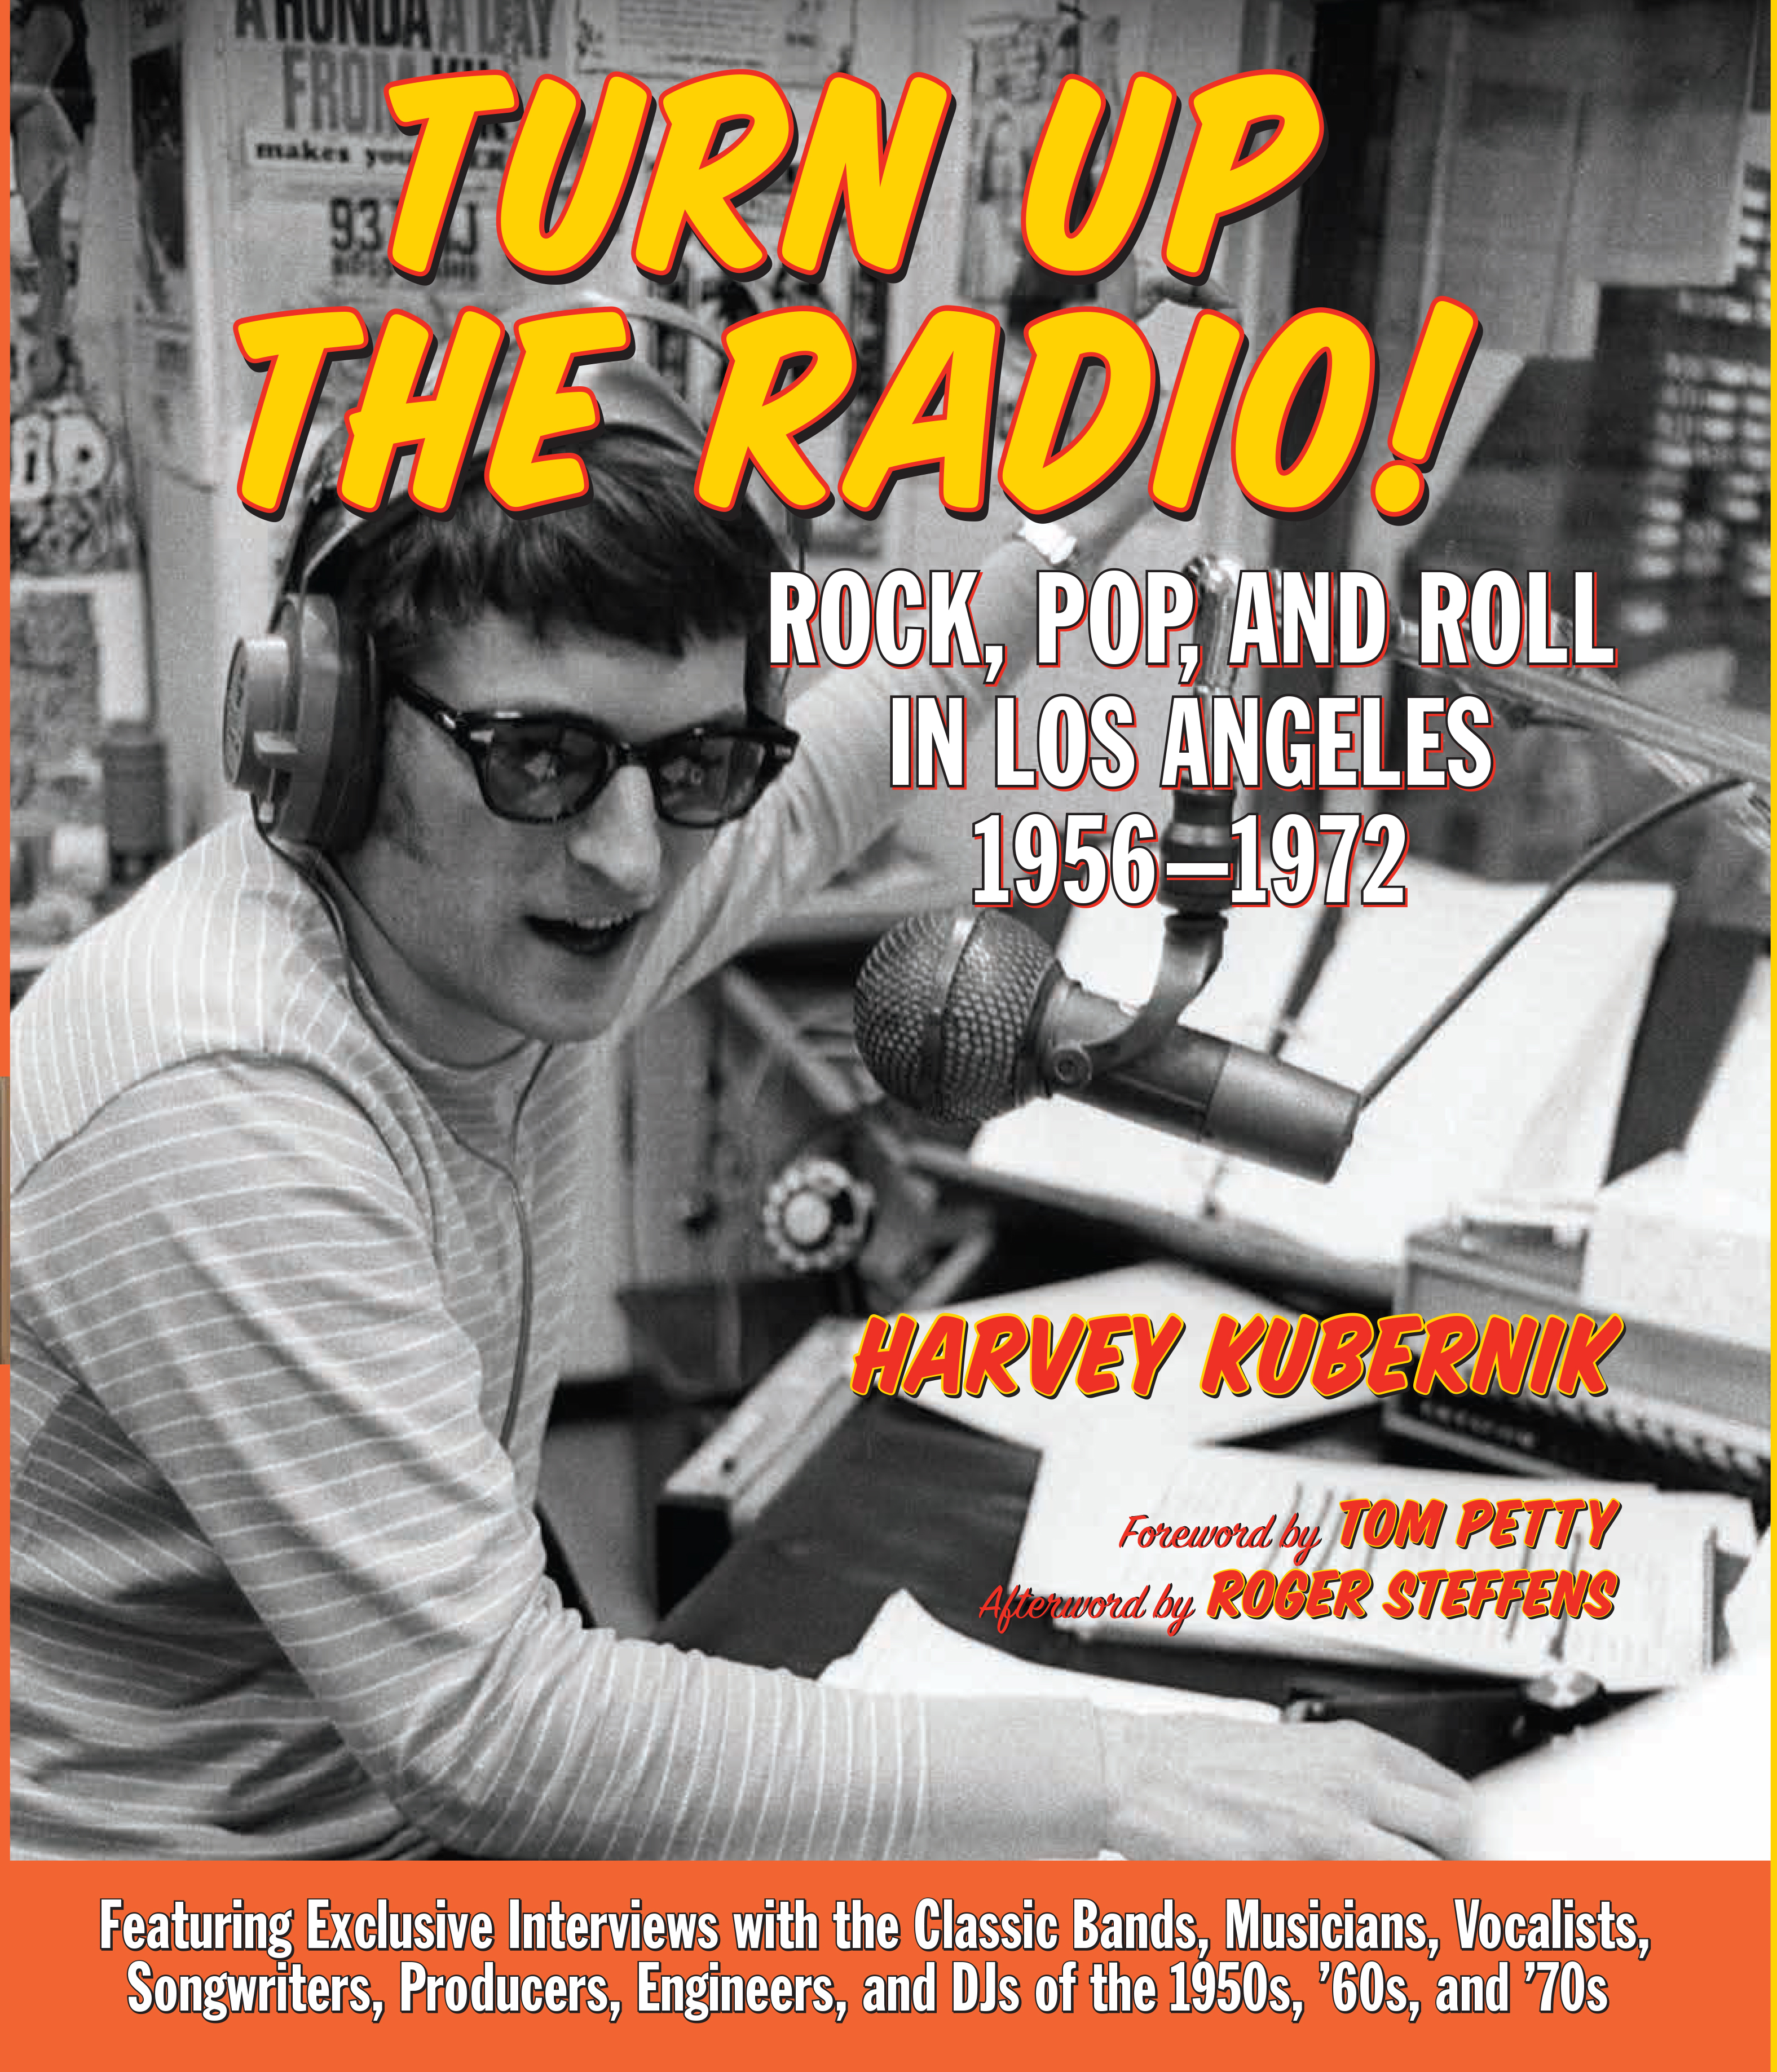 Turn Up The Radio! Harvey Kubernik’s New Book Is Out For The Masses